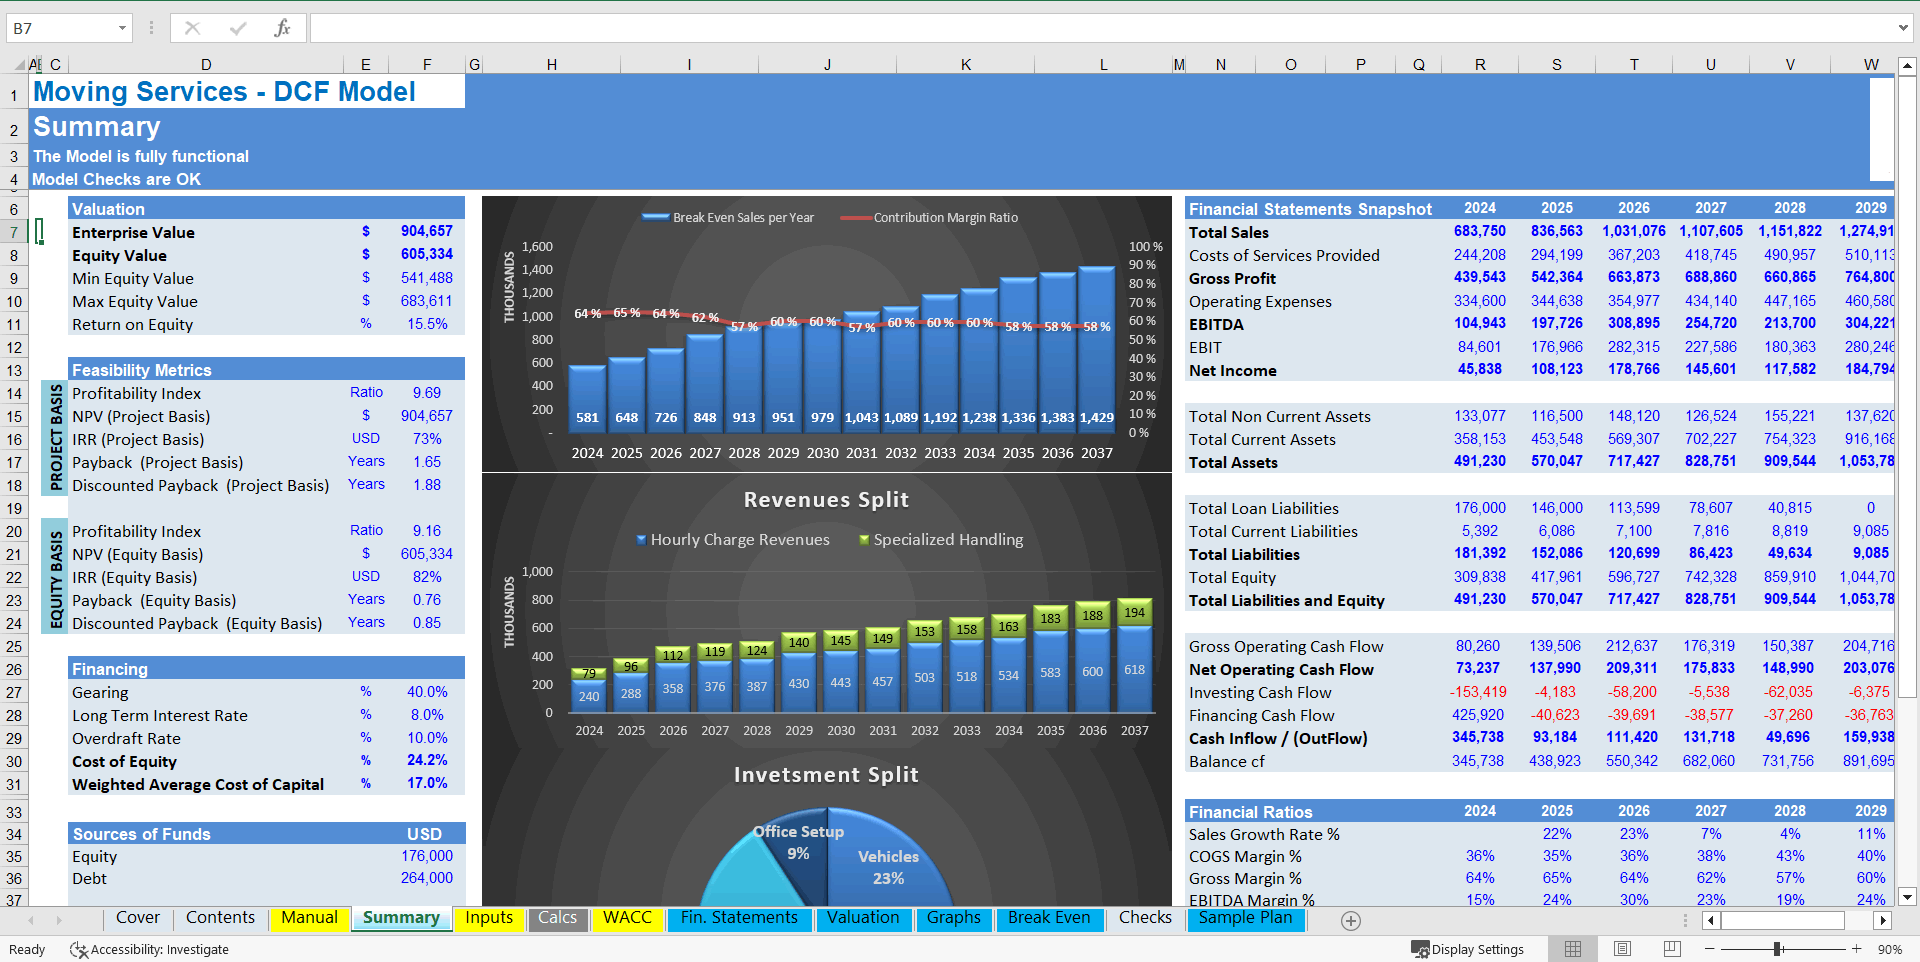 Moving Services Business Financial Model (10+ Year DCF Valuation) (Excel template (XLSX)) Preview Image